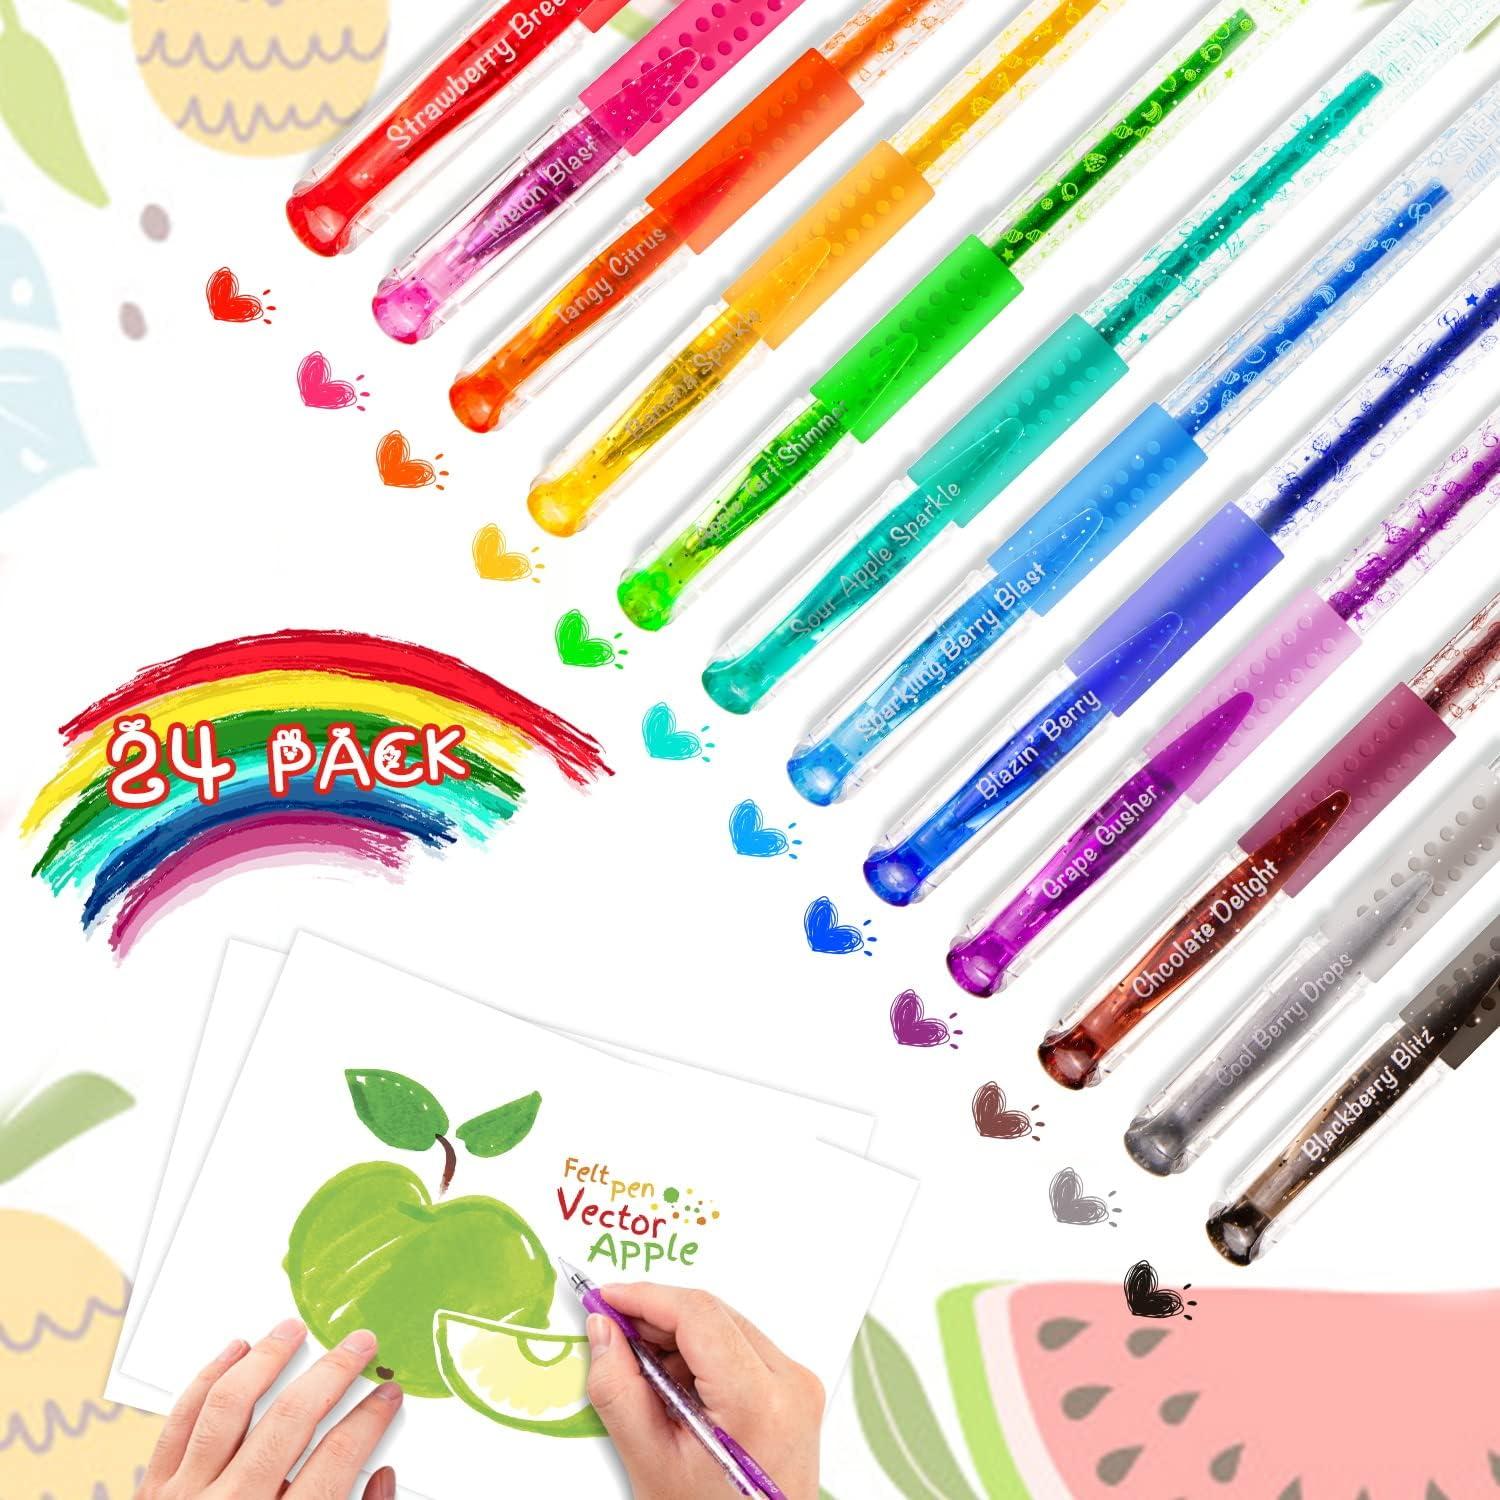 sunacme Fruity Scented Gel Pens, Sweet Scented Glitter Gel Pens, Cute  School Supplies for Coloring, Journaling, Drawing, Note Taking - 24 Pack  Gift